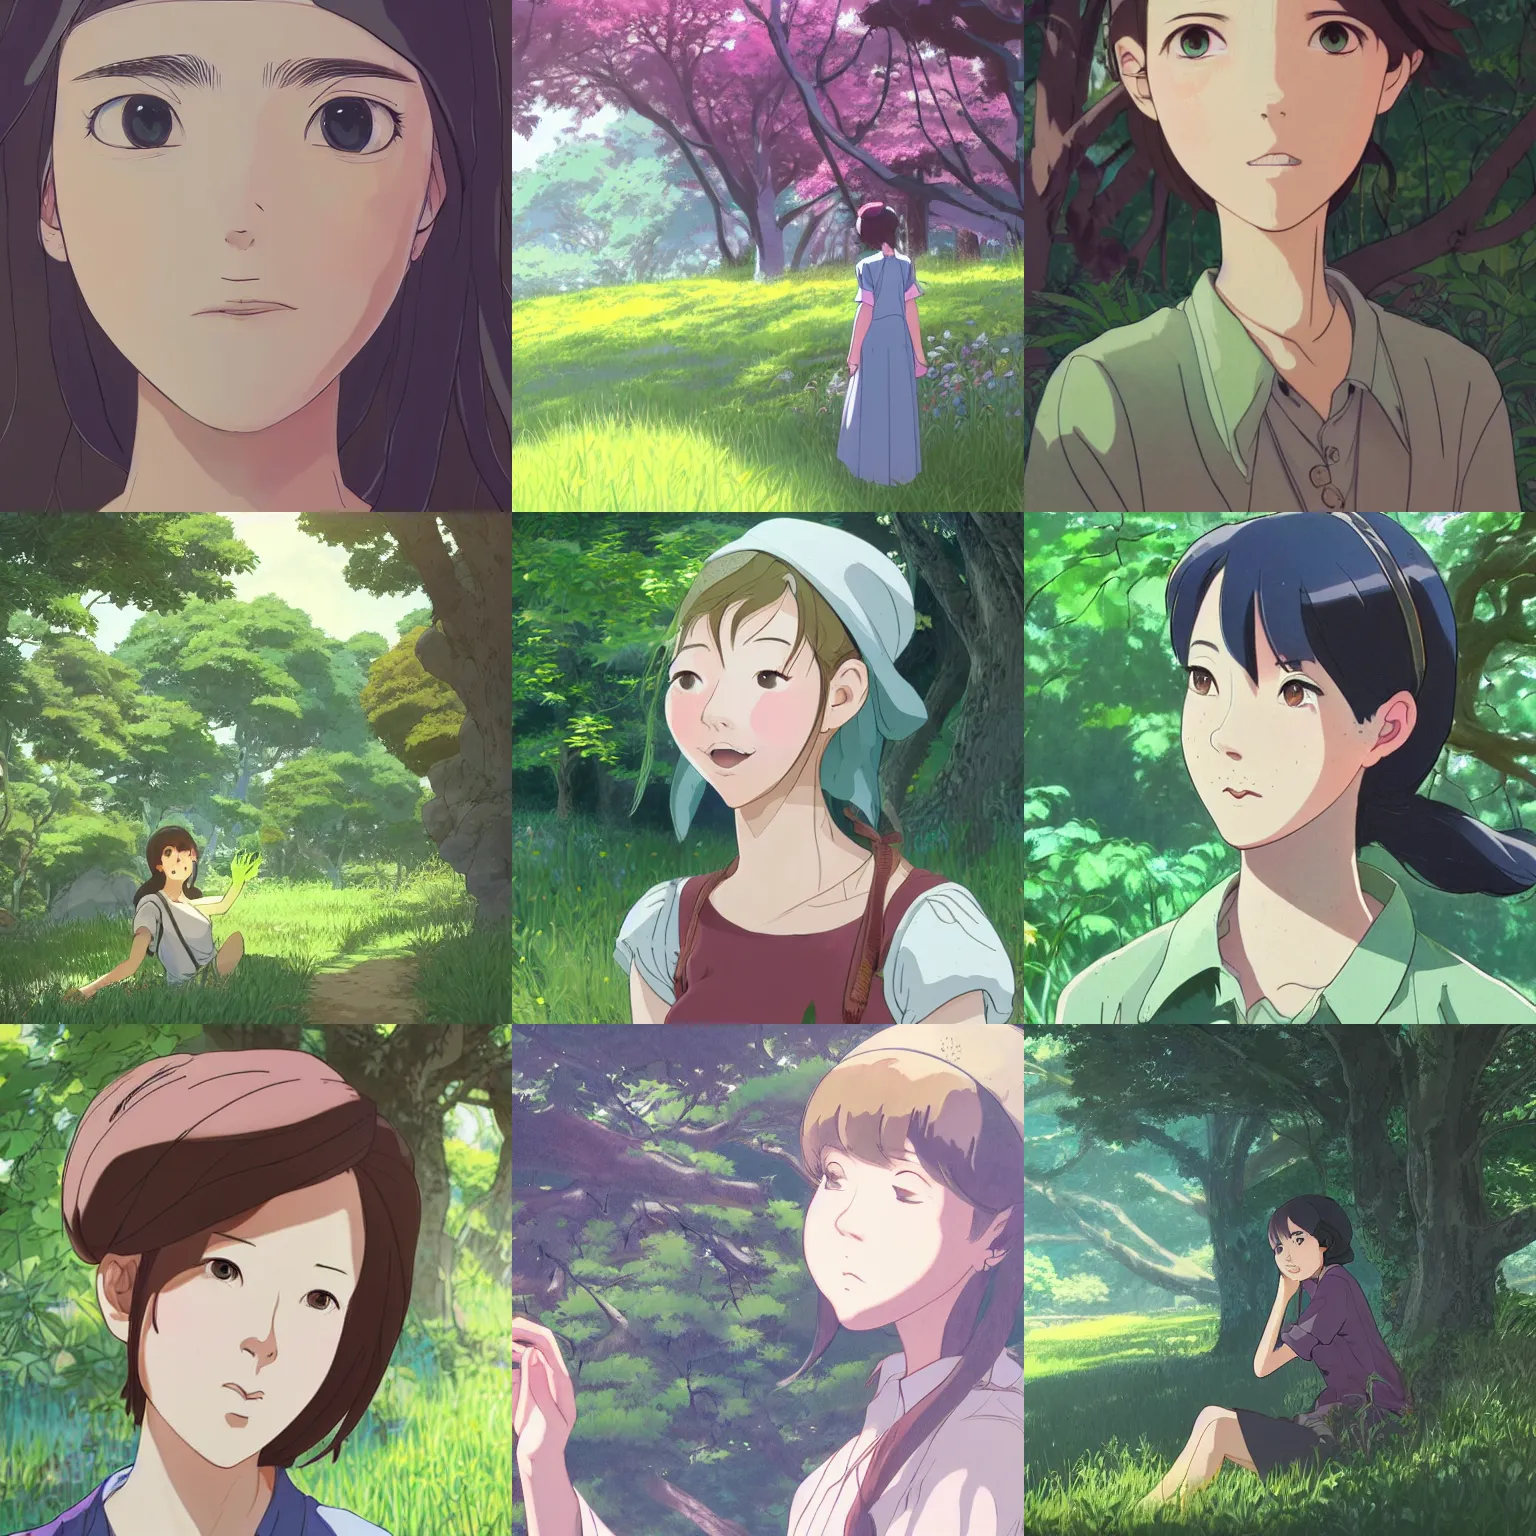 Prompt: Character portrait of a young woman in a lush park, cartoonish facial features, expressive eyes, highly detailed, cel shading, Studio Ghibli still, by Makoto Shinkai and Akihiko Yoshida